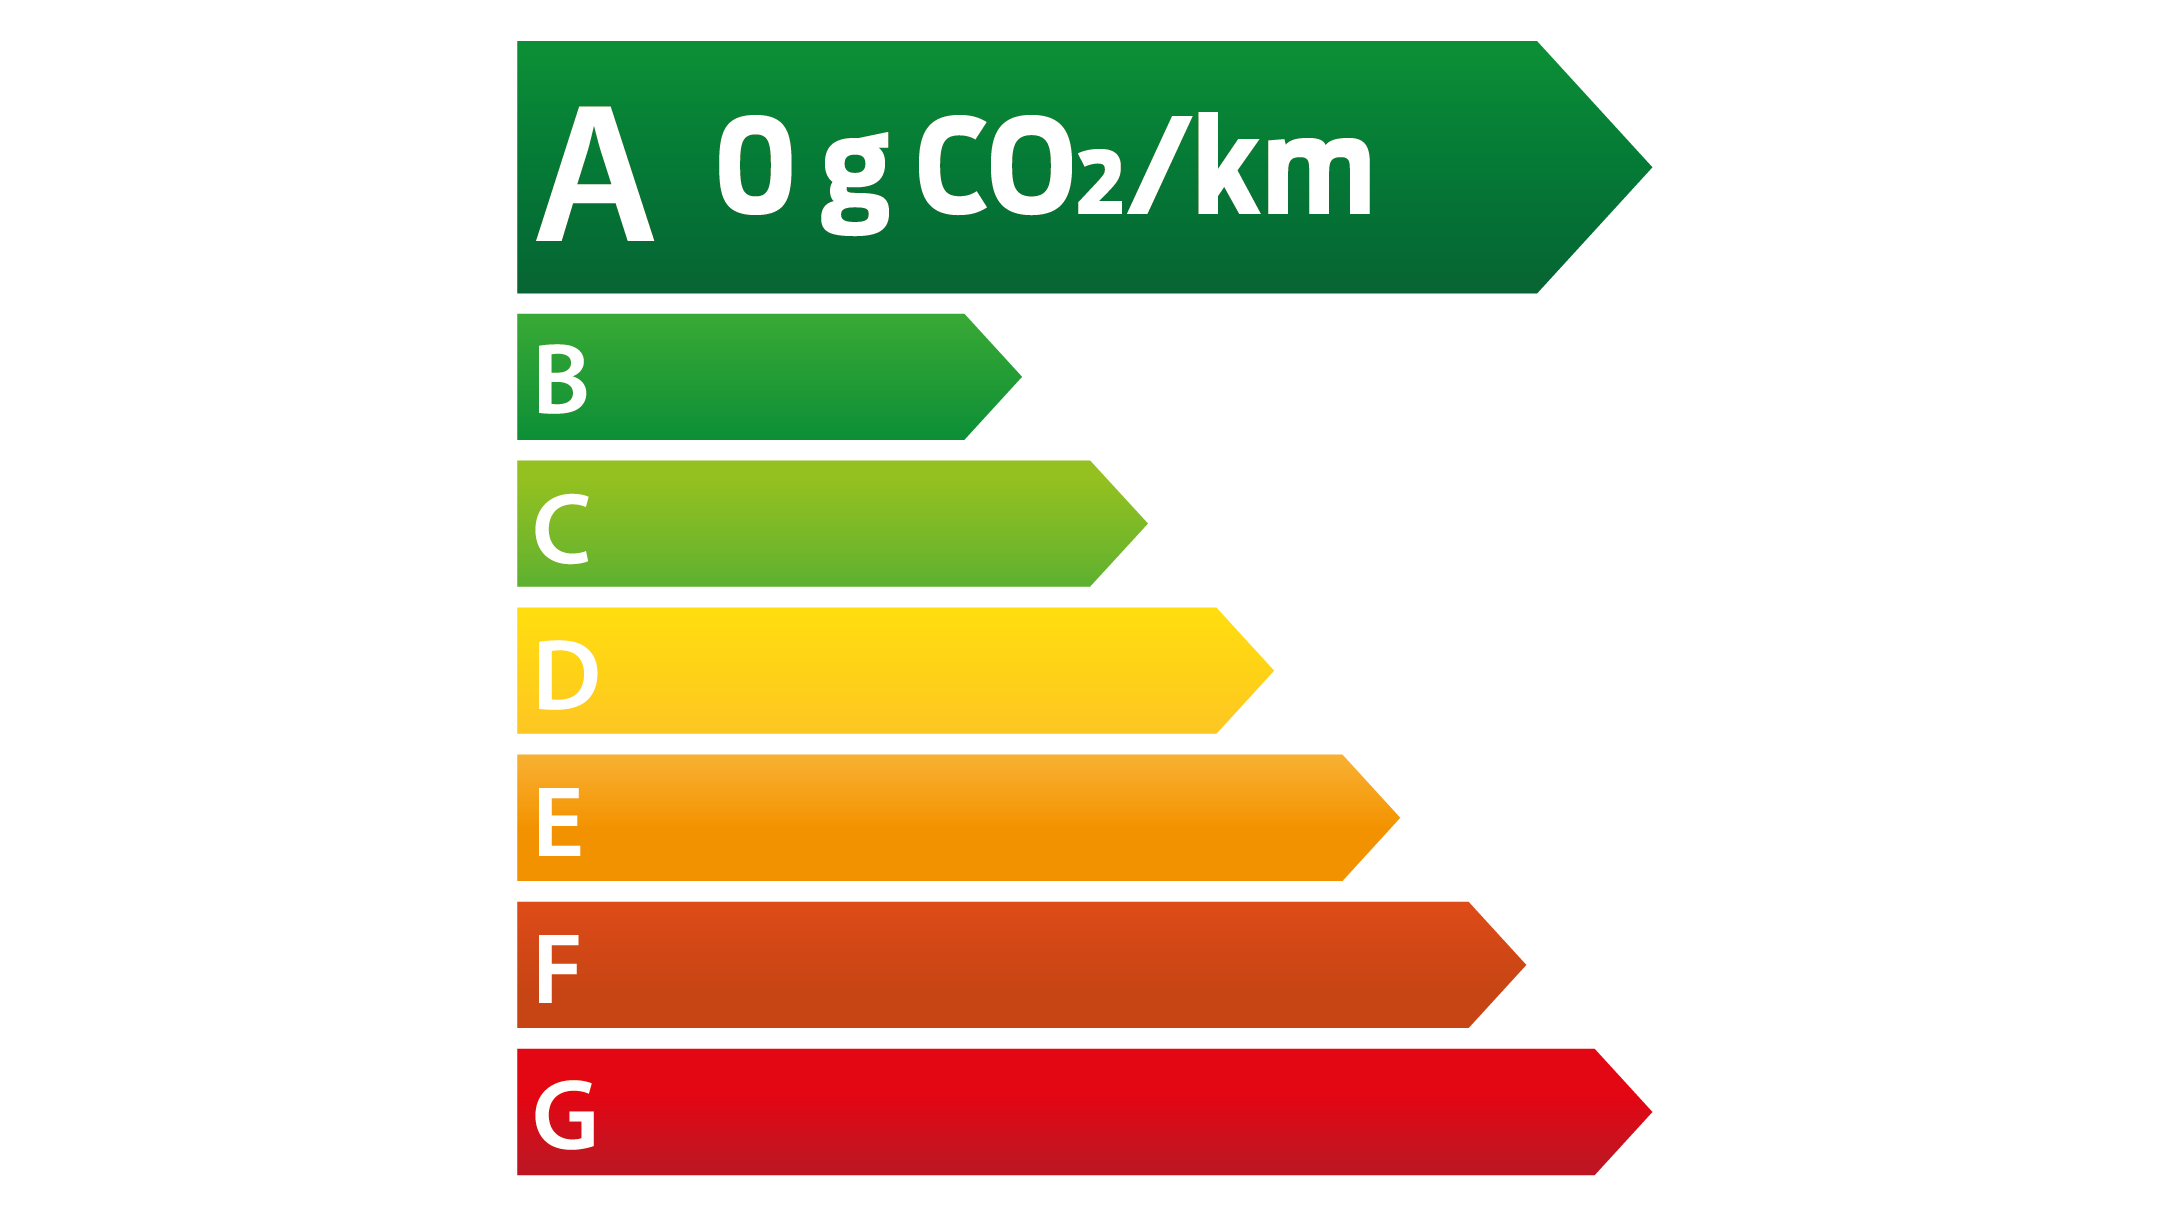 Energy label A